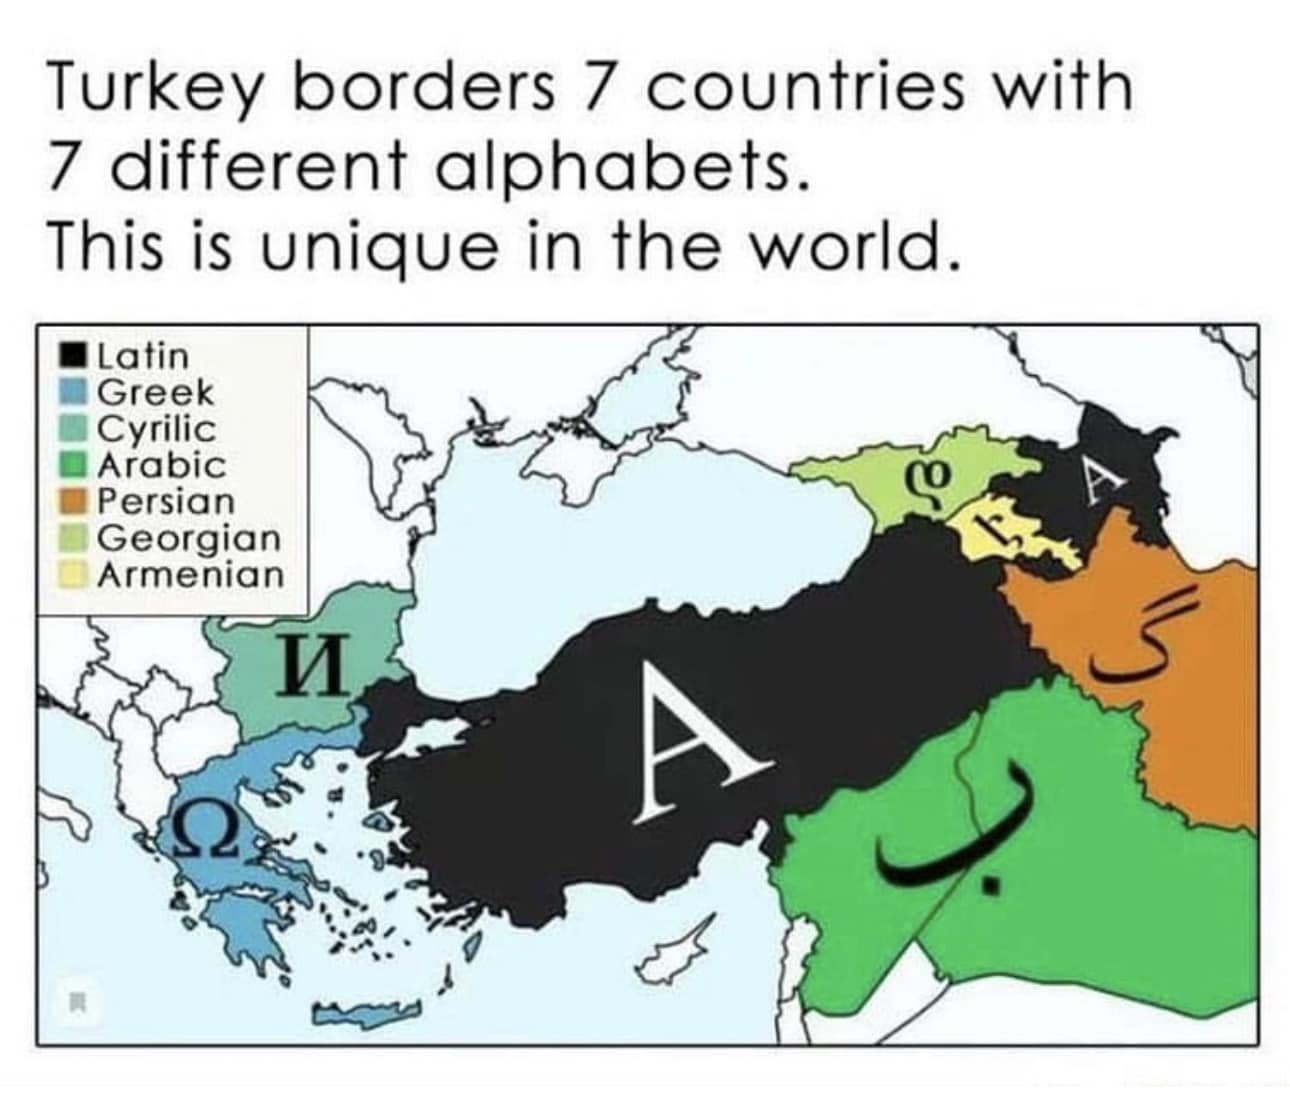 Map showing turkey and its seven neighboring countries, each highlighted in different colors and labeled with their respective alphabets, emphasizing the uniqueness of their scripts.